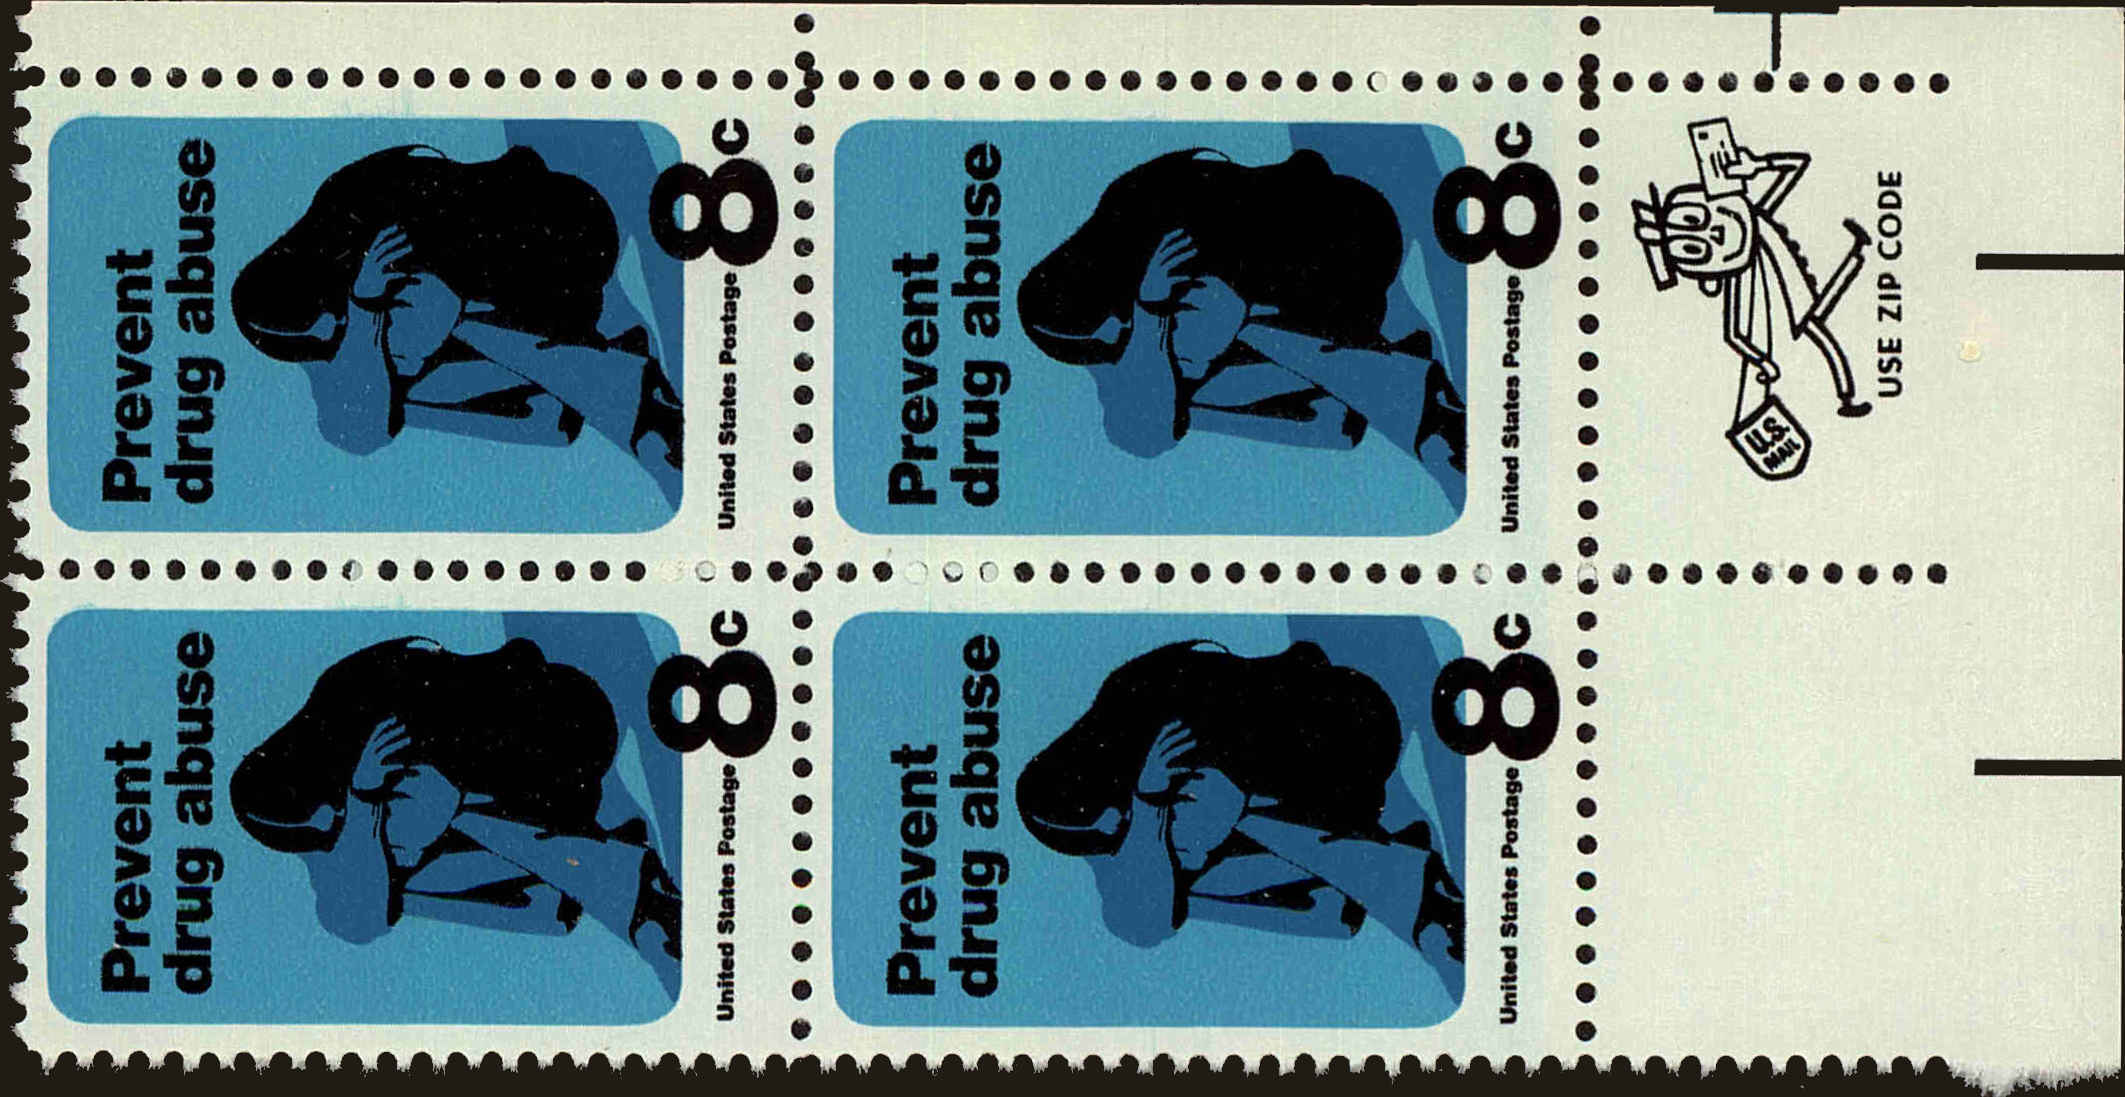 Front view of United States 1438 collectors stamp